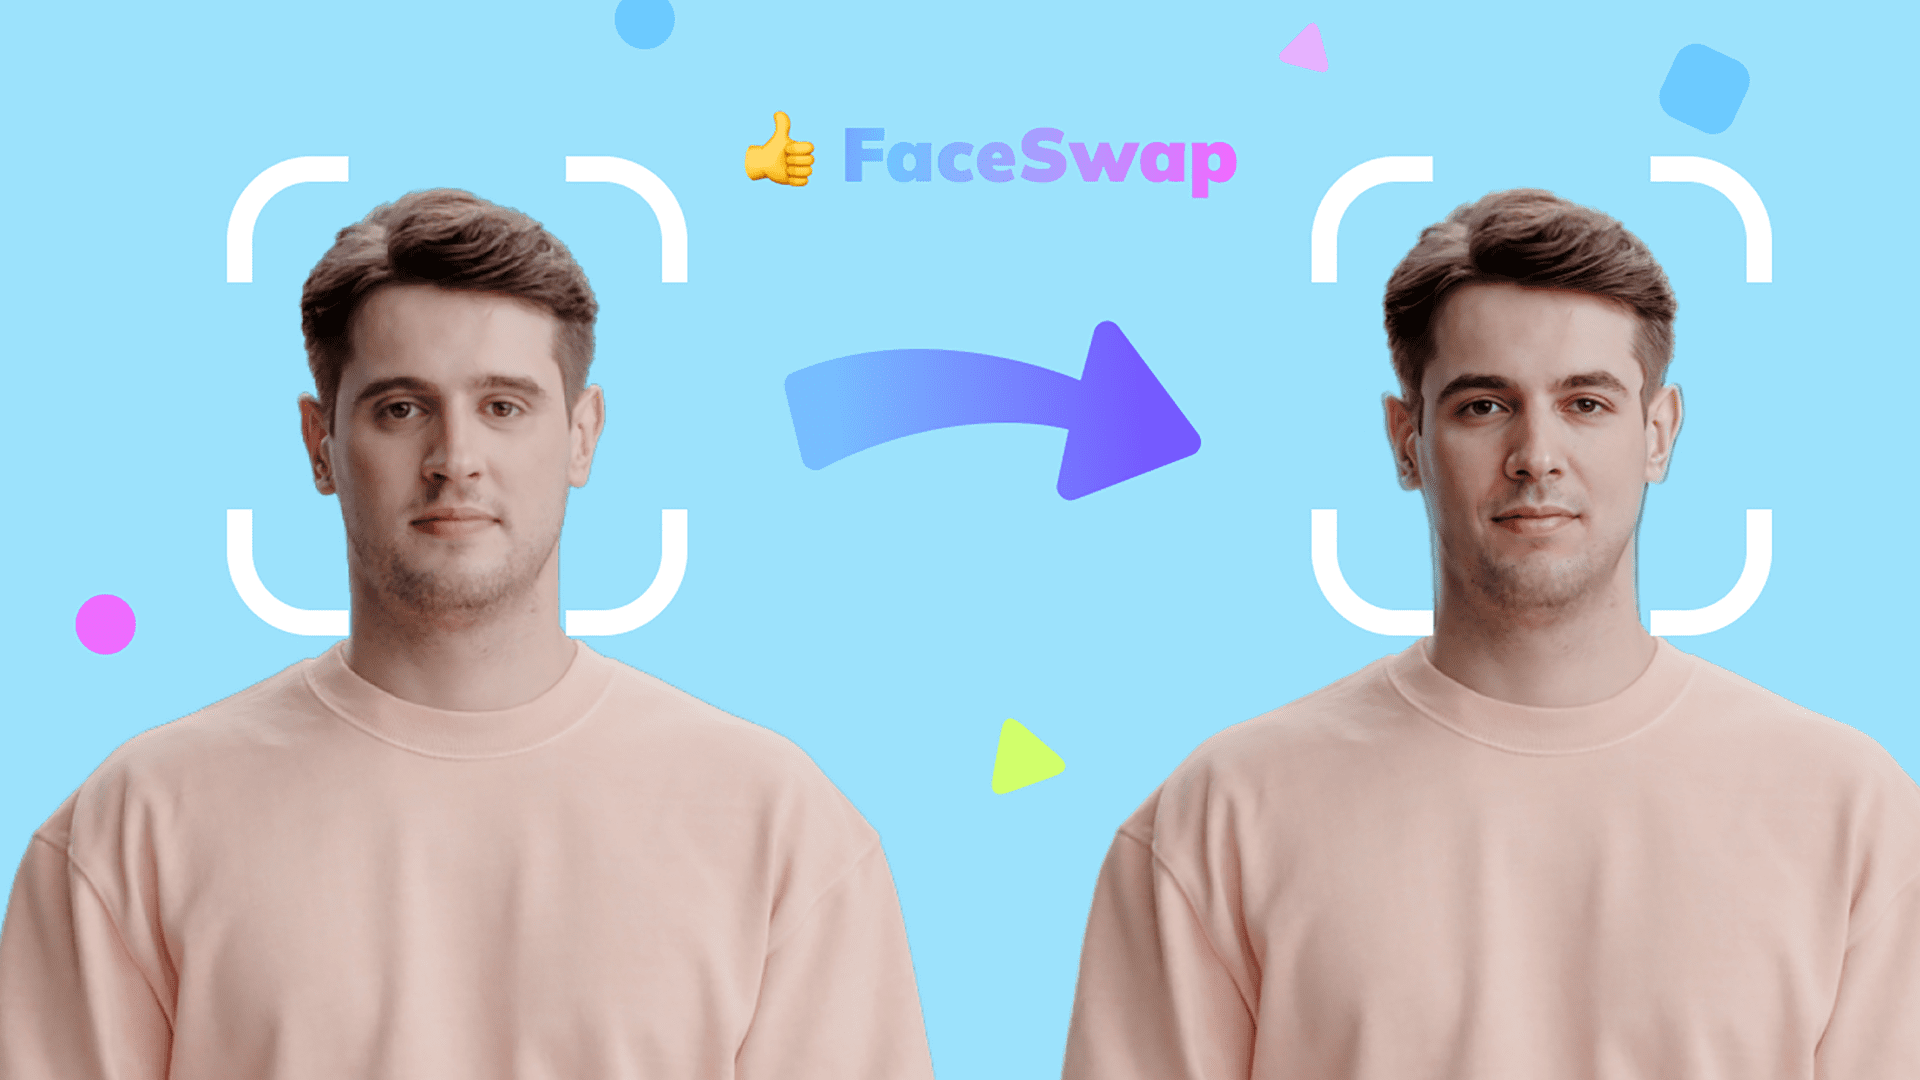 Protecting Yourself from Face-Swapping Romance Scams